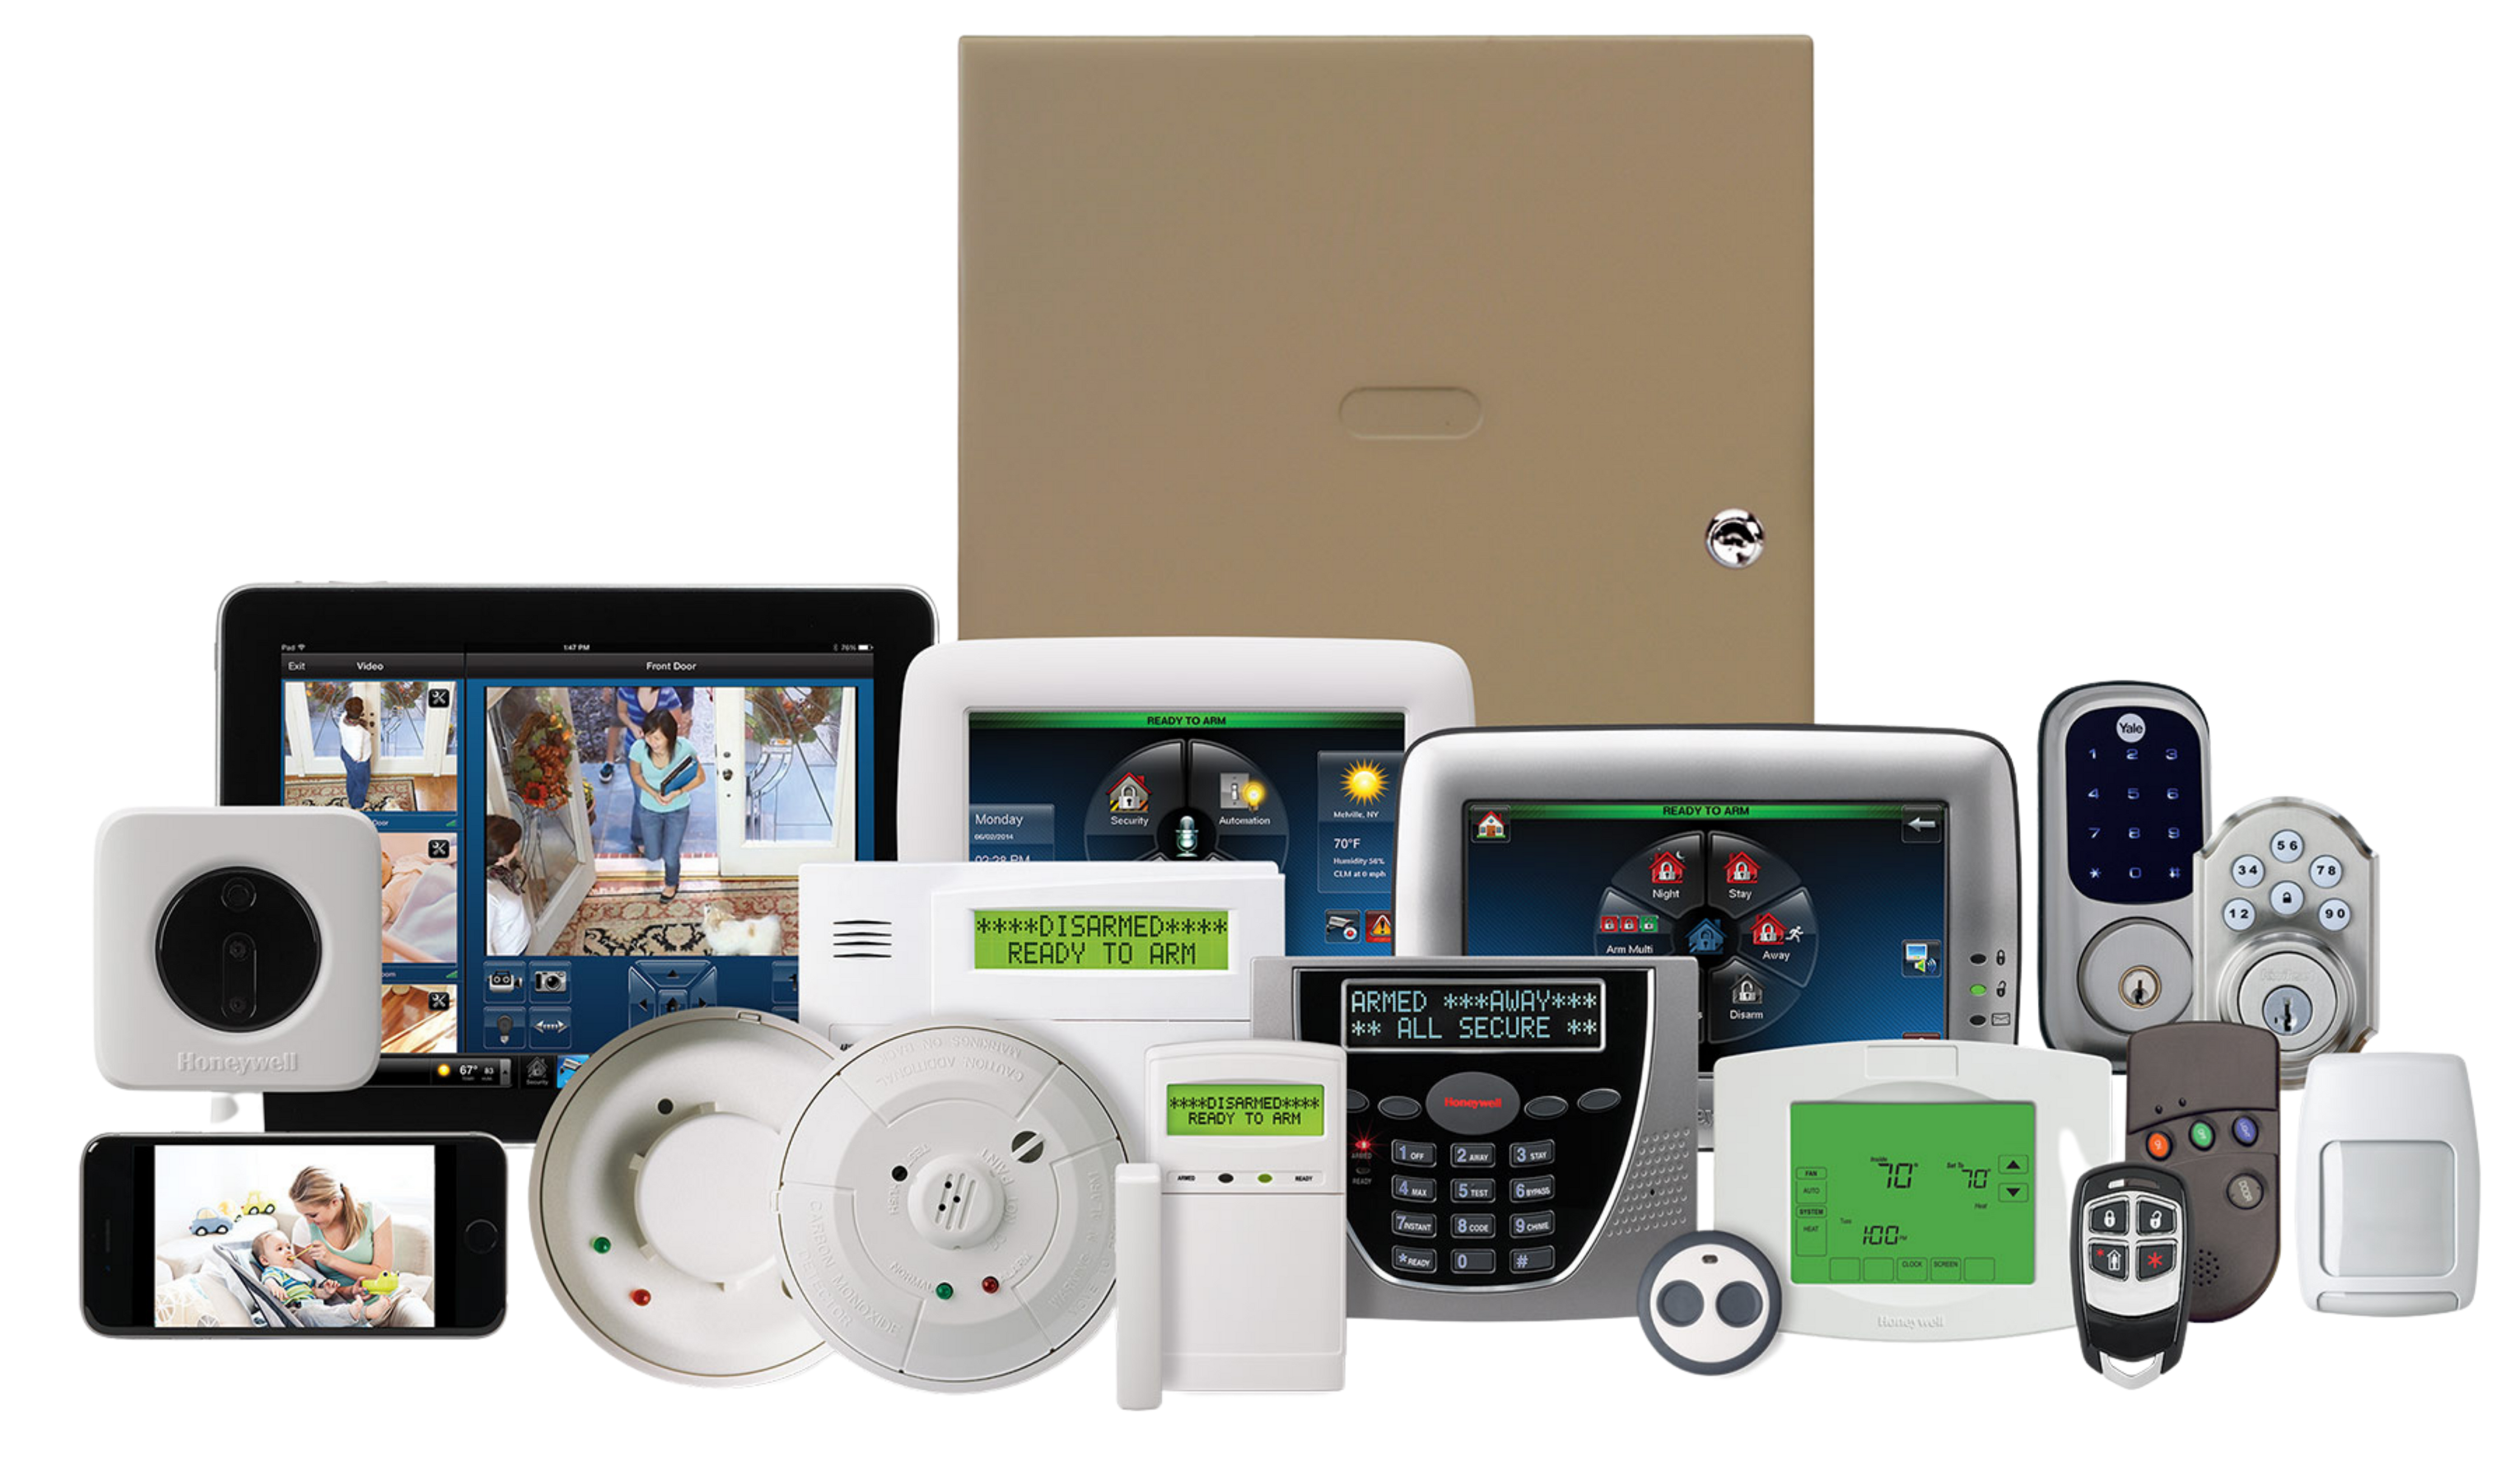 The Vista Series line of security alarm systems from Ademco and Honeywell. Commonly installed by ADT in the early 2000's.